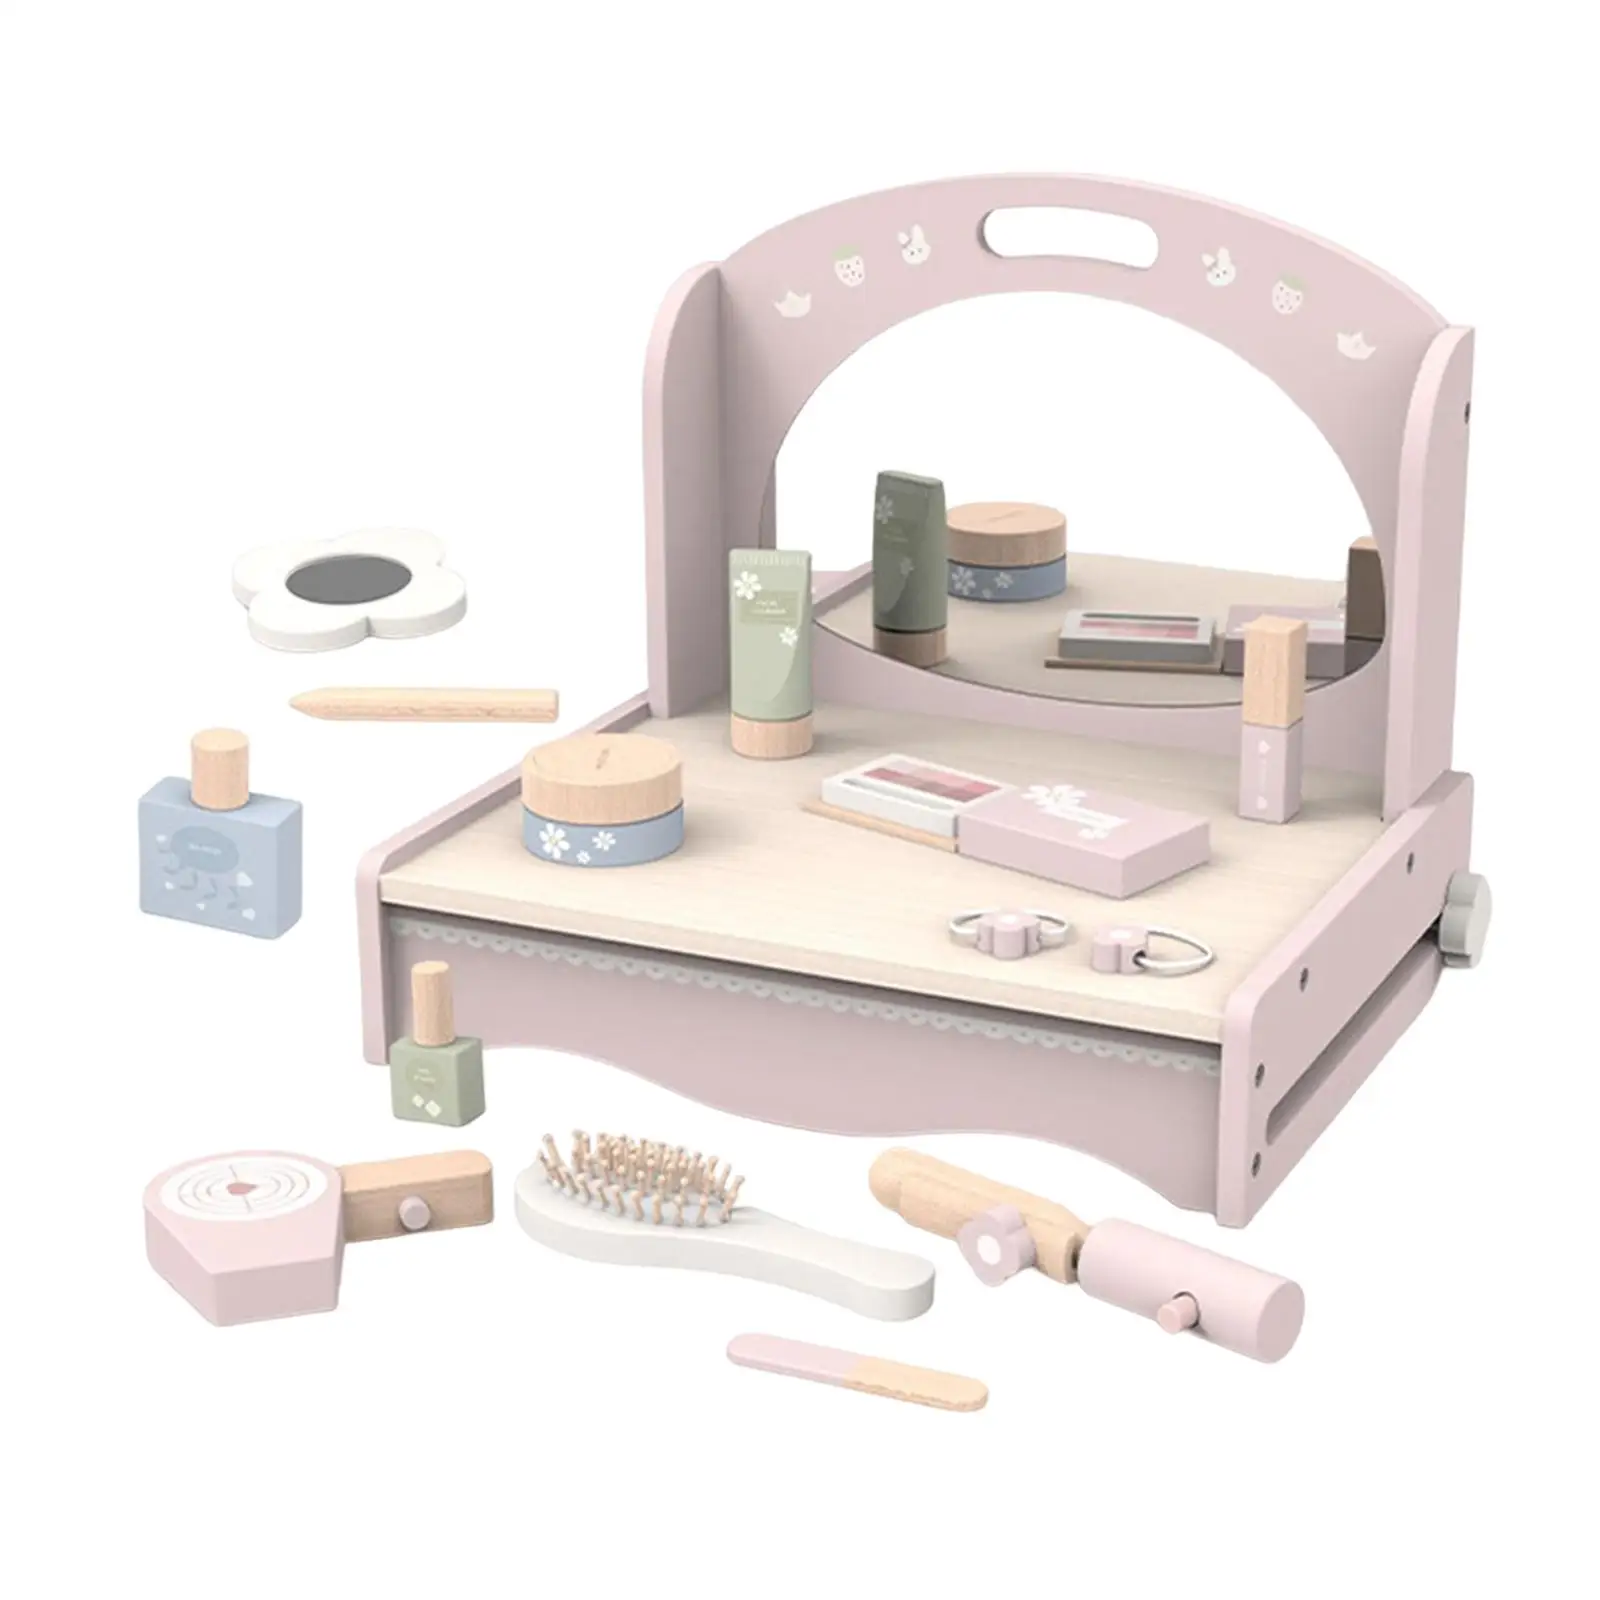 Wood Kids Makeup Sets ,Cosmetic Set ,Simulation Play Room with Pretend Makeup